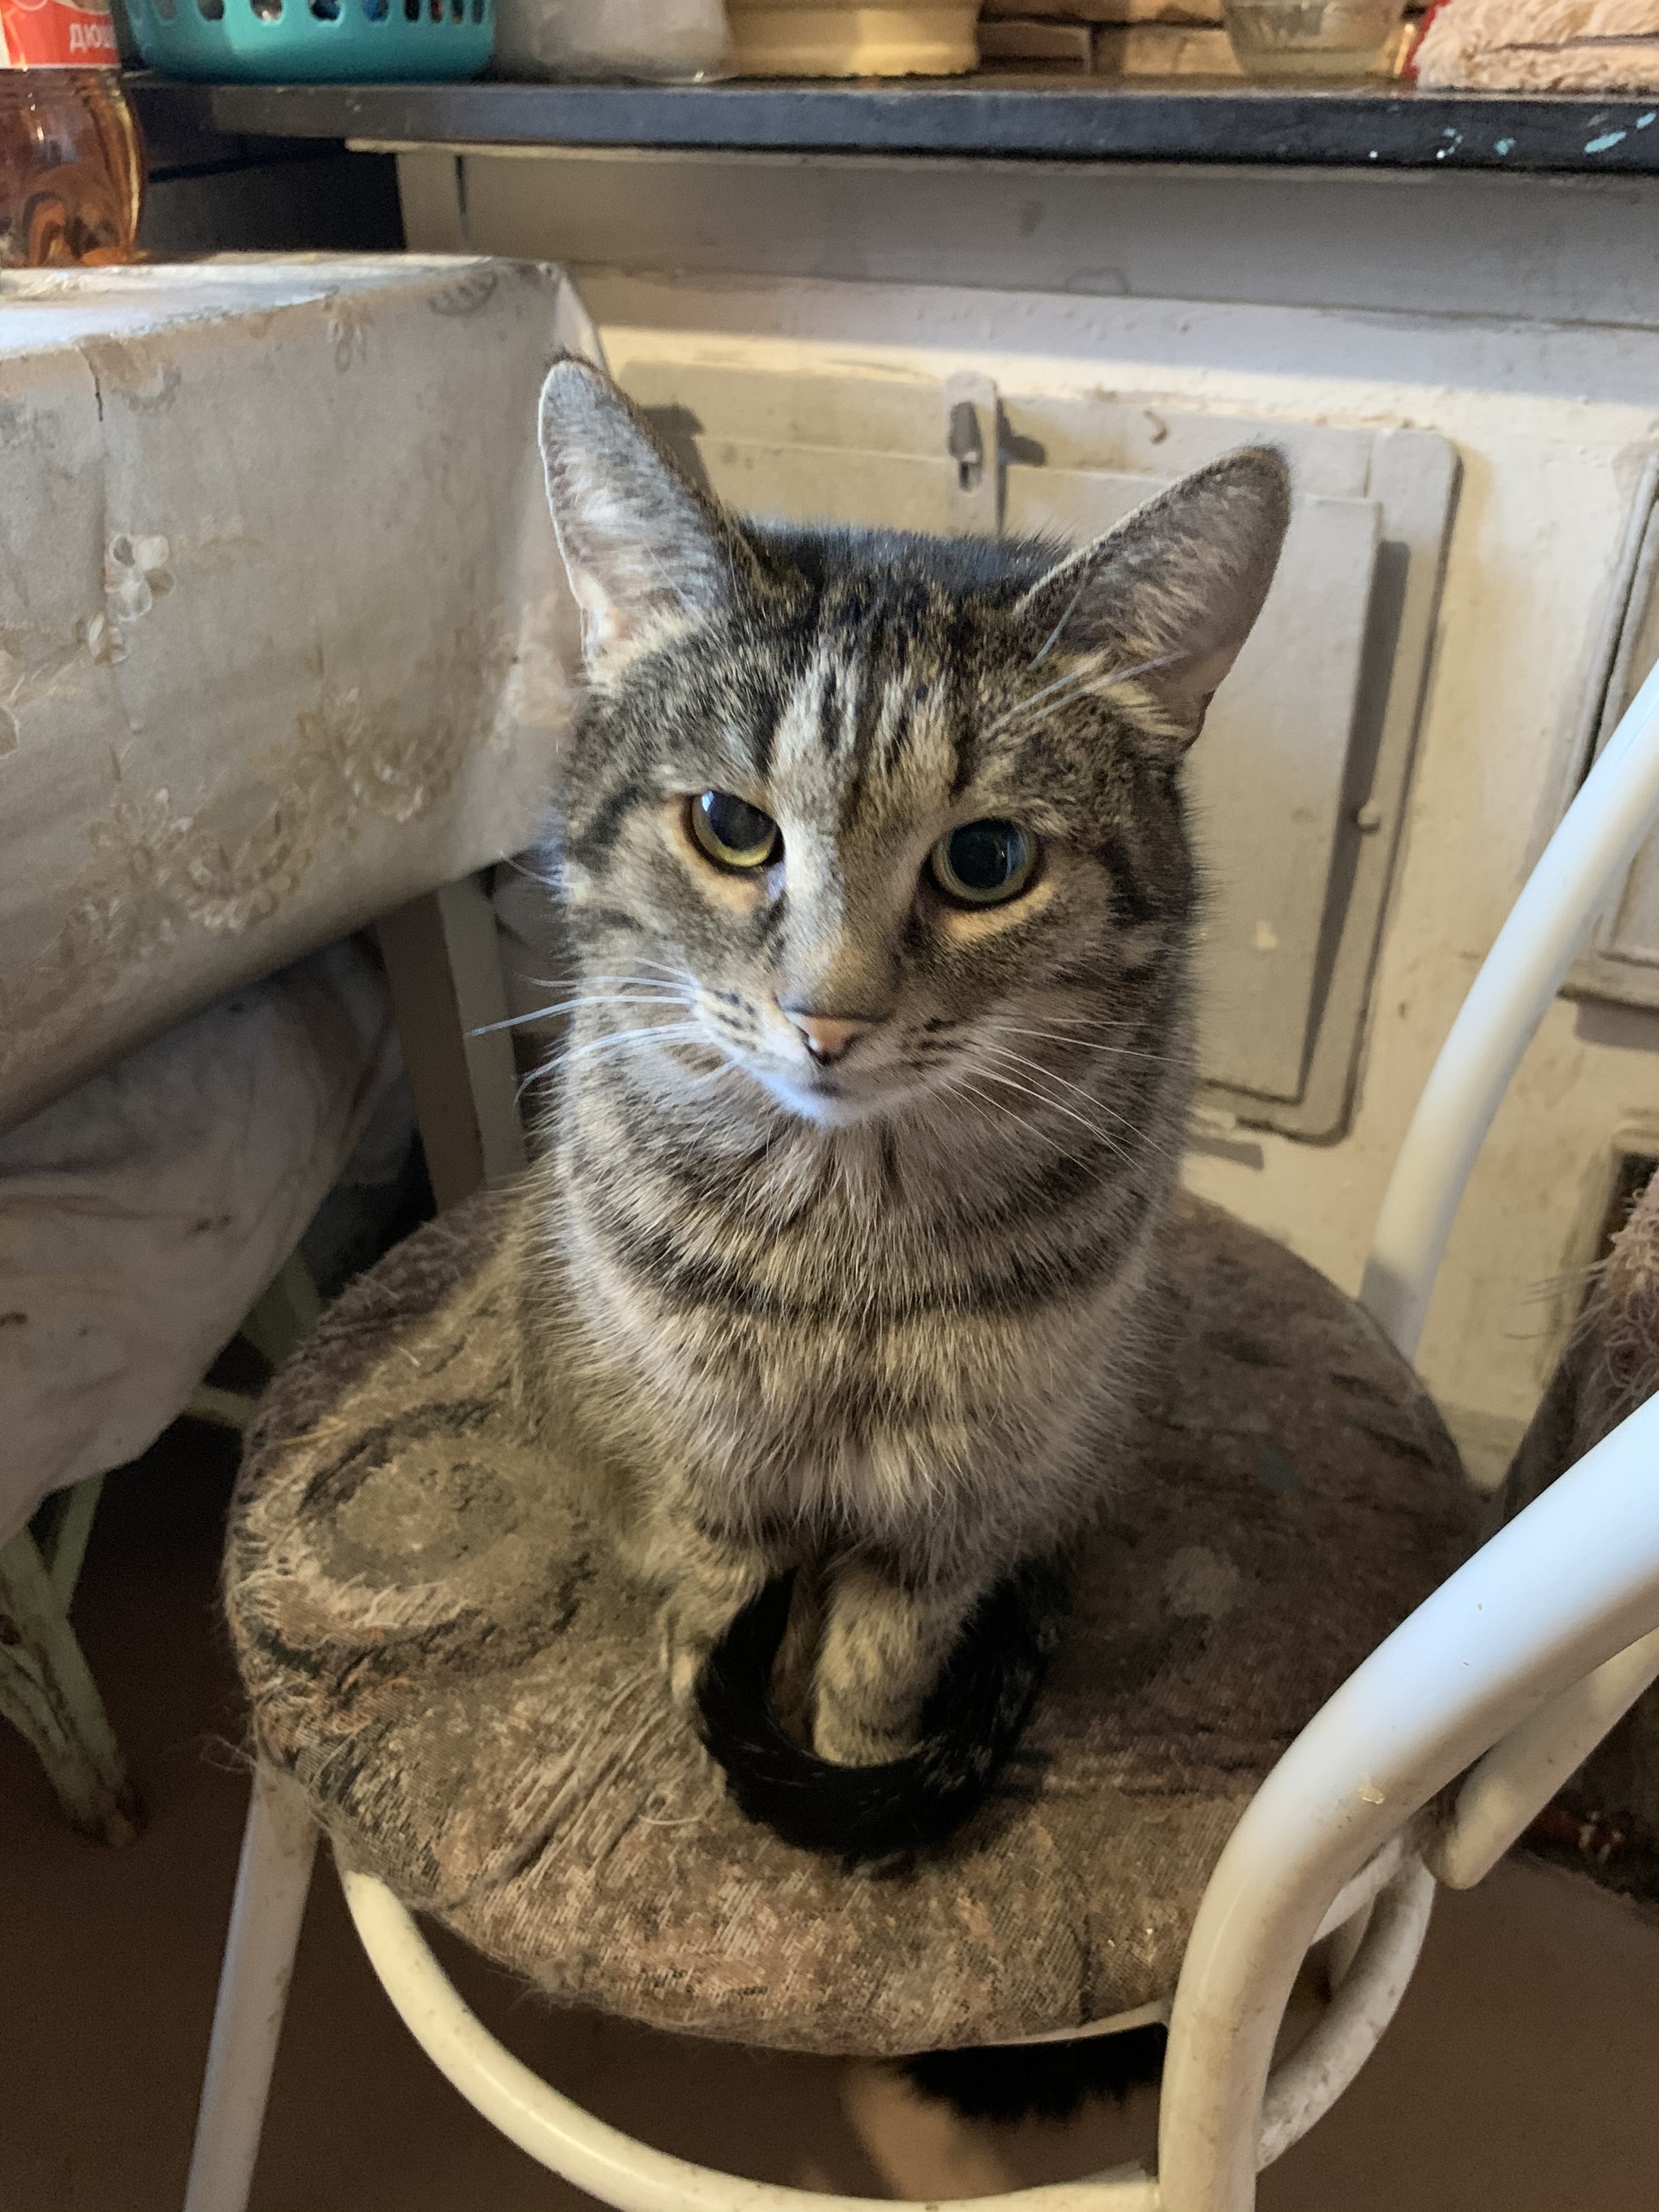 Find my man! - My, cat, Kittens, In good hands, Saint Petersburg, Leningrad region, No rating, Animal shelter, Shelter, , cat house, Cataract, Animal Rescue, Kindness, Good deeds, Veterinary, Ophthalmology, Vision, Ophthalmologist, Video, Longpost